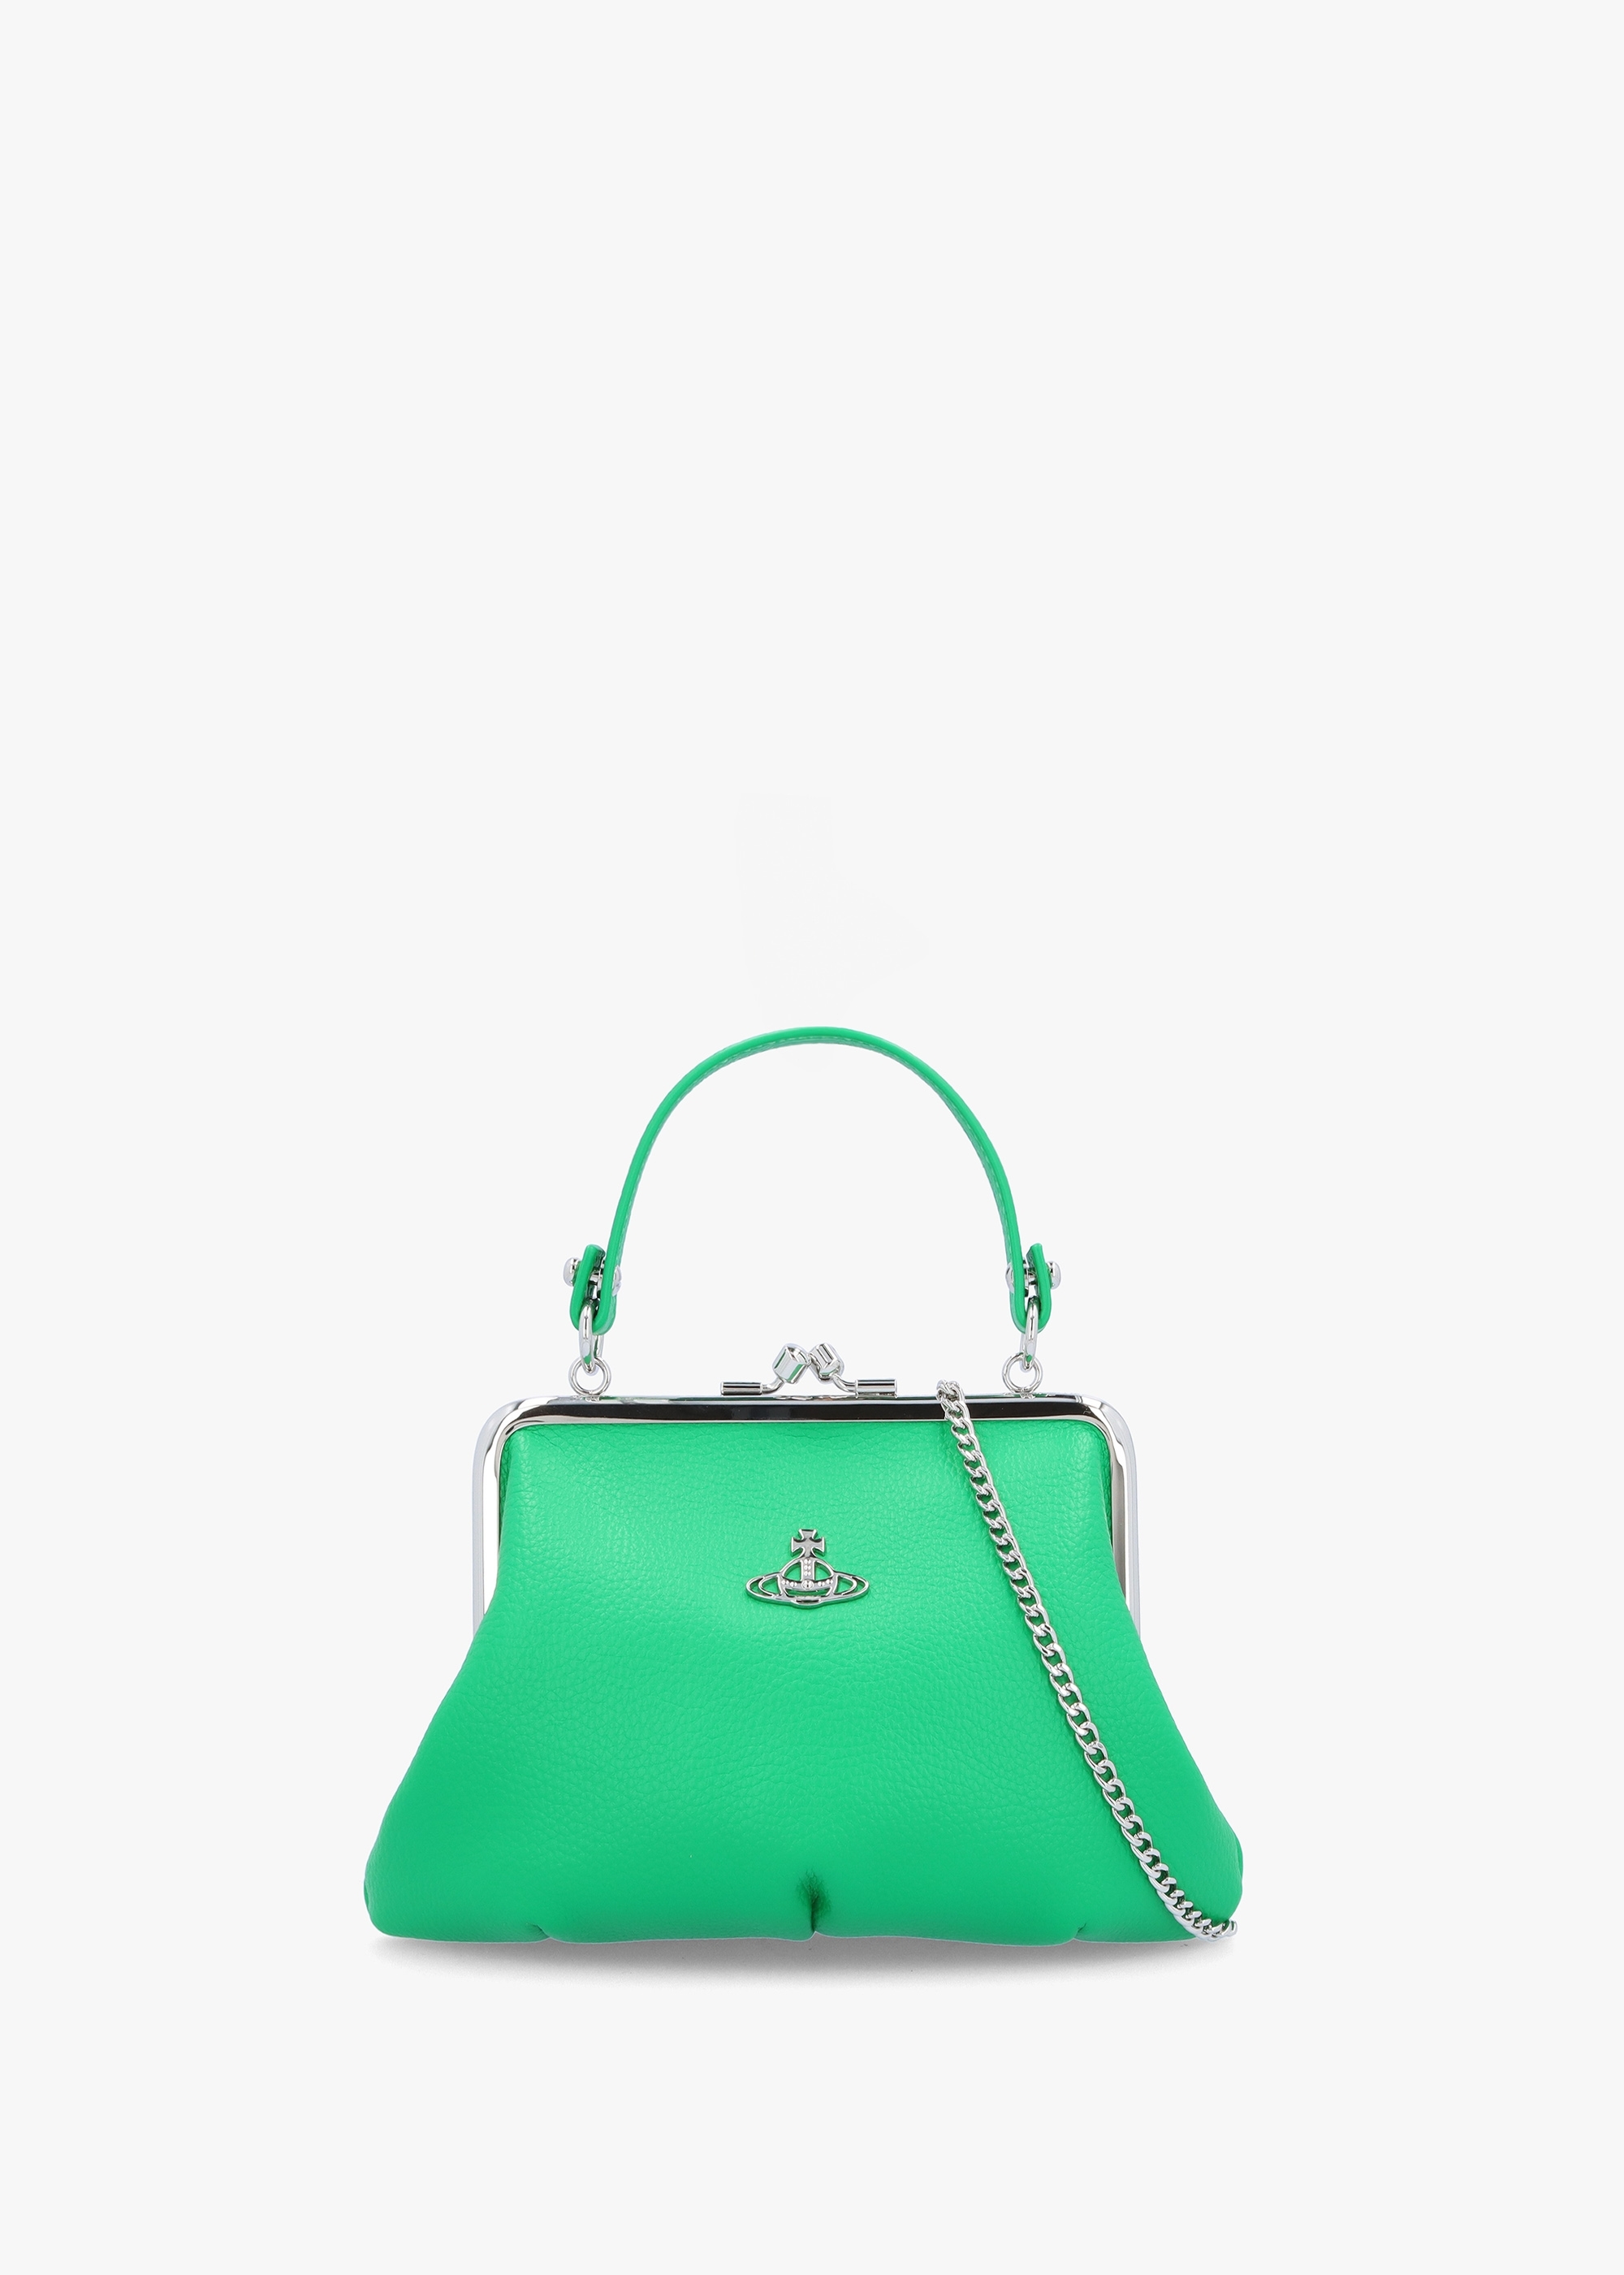 Vivienne Westwood  Womens Vegan Granny Frame Purse On A Chain In Bright Green